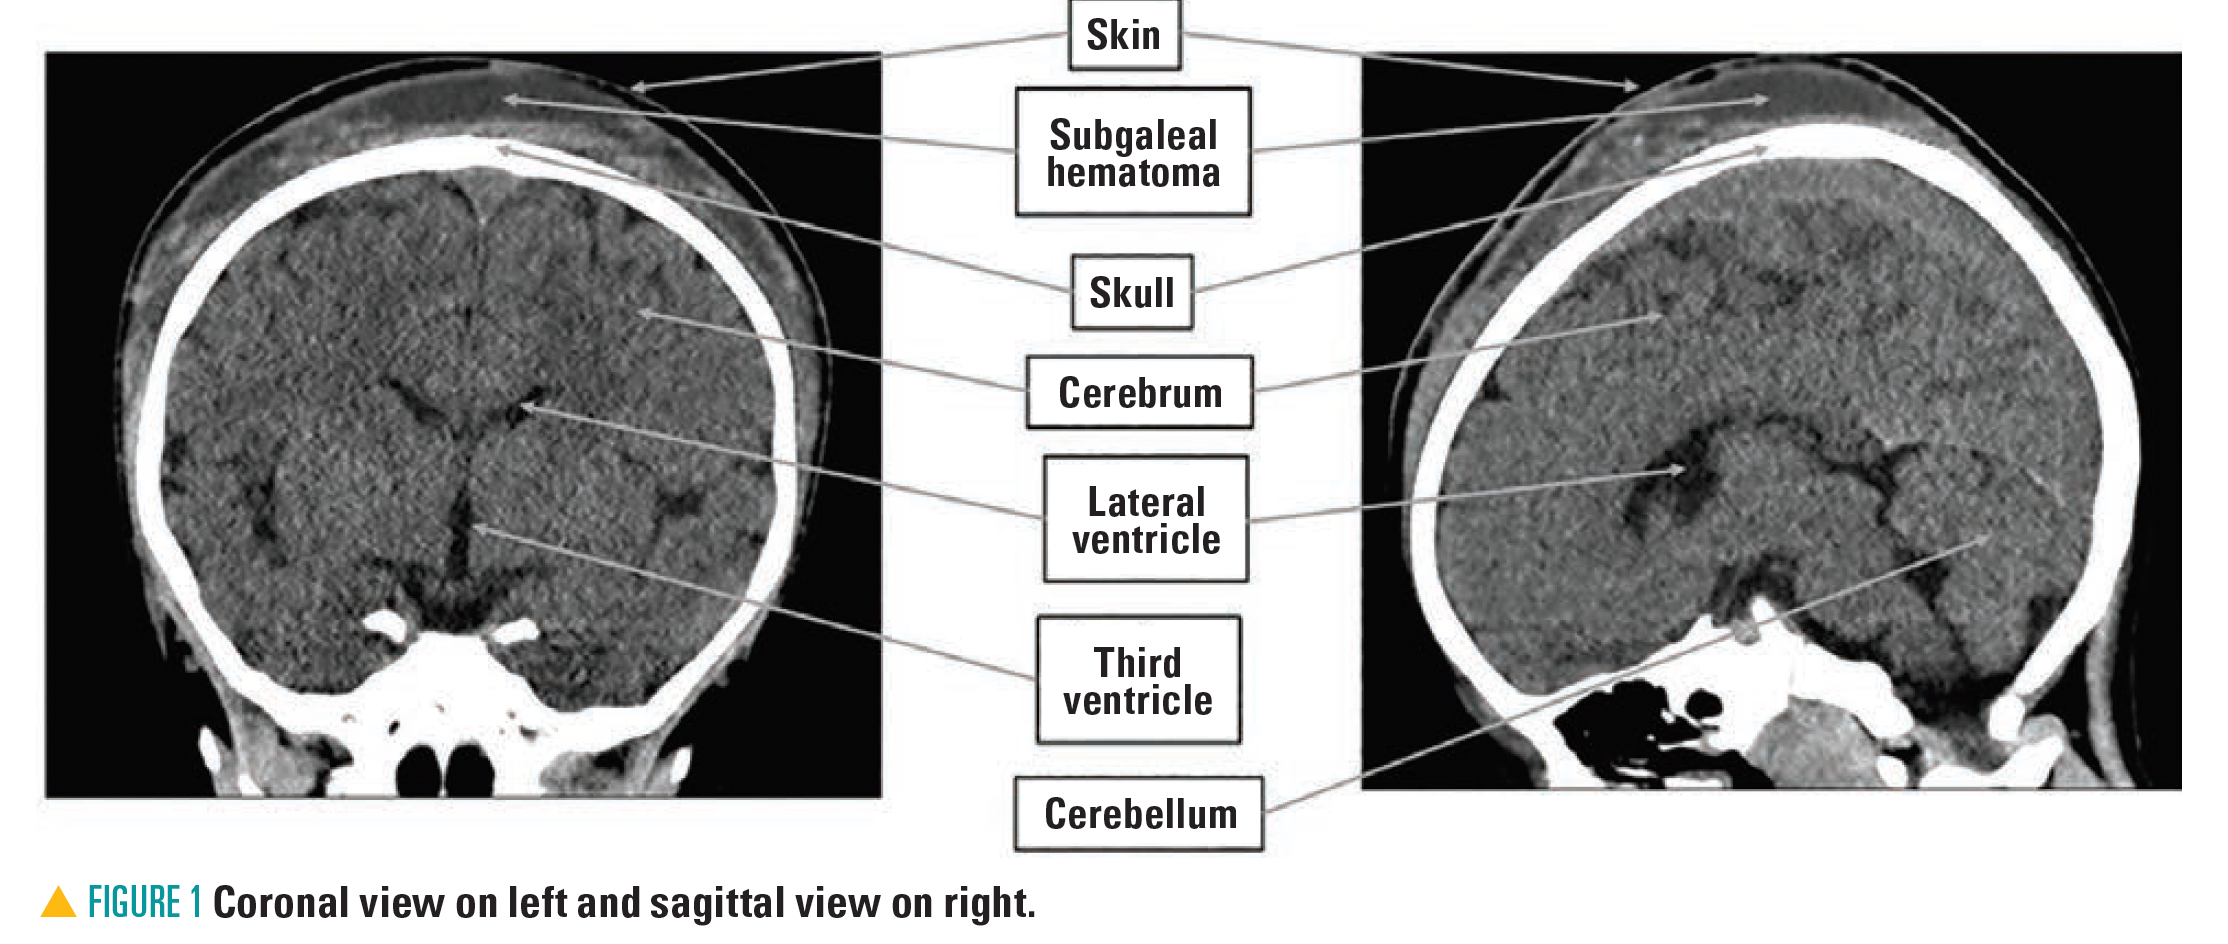 Coronal view on left and sagittak view on right